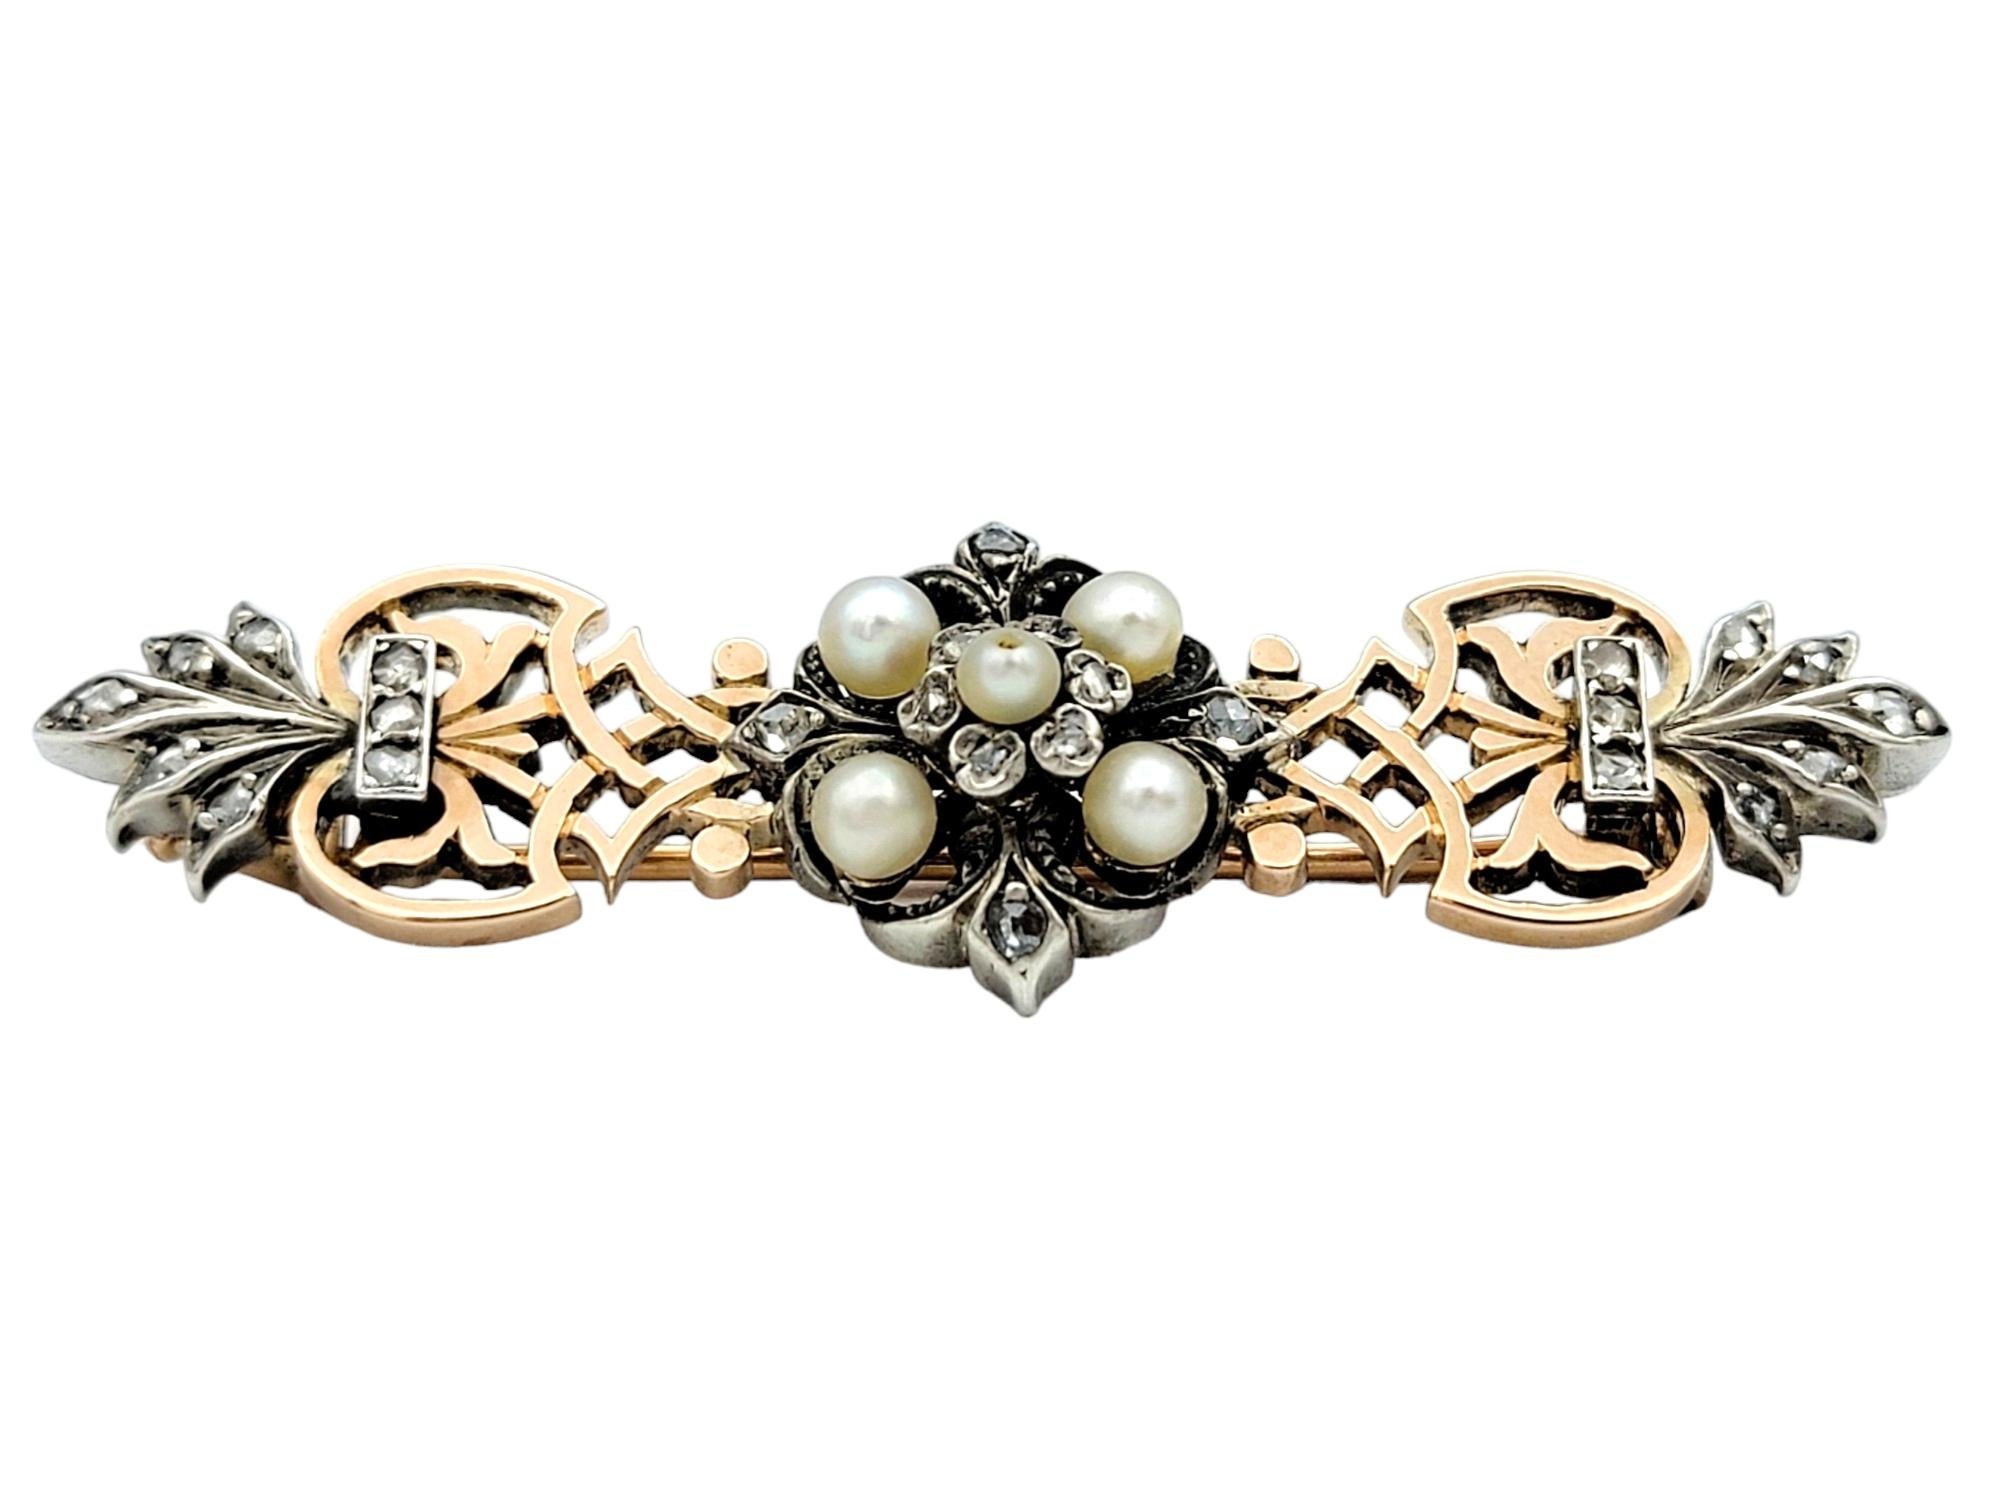 This exquisite antique brooch, crafted in 14 karat rose gold and adorned with lustrous seed pearls and sparkling diamonds, is a charming piece that is perfect for any occasion. Each pearl is meticulously set within the warm rose gold setting, adding